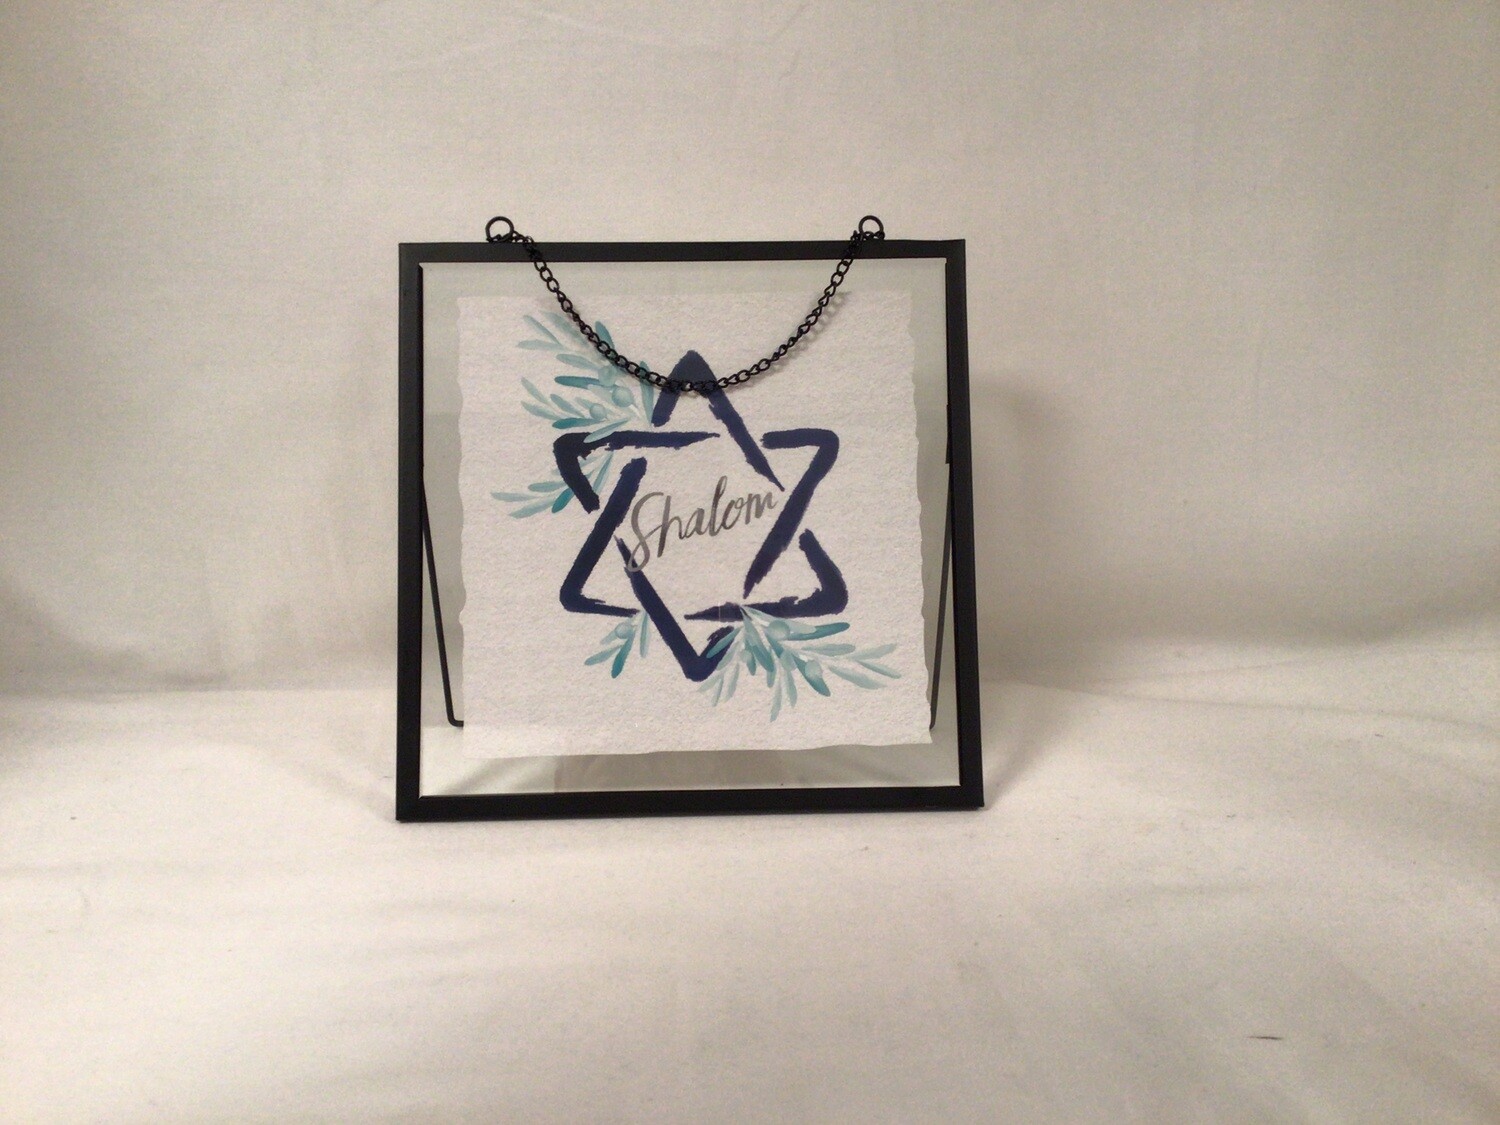 Shalom Table or Wall Art